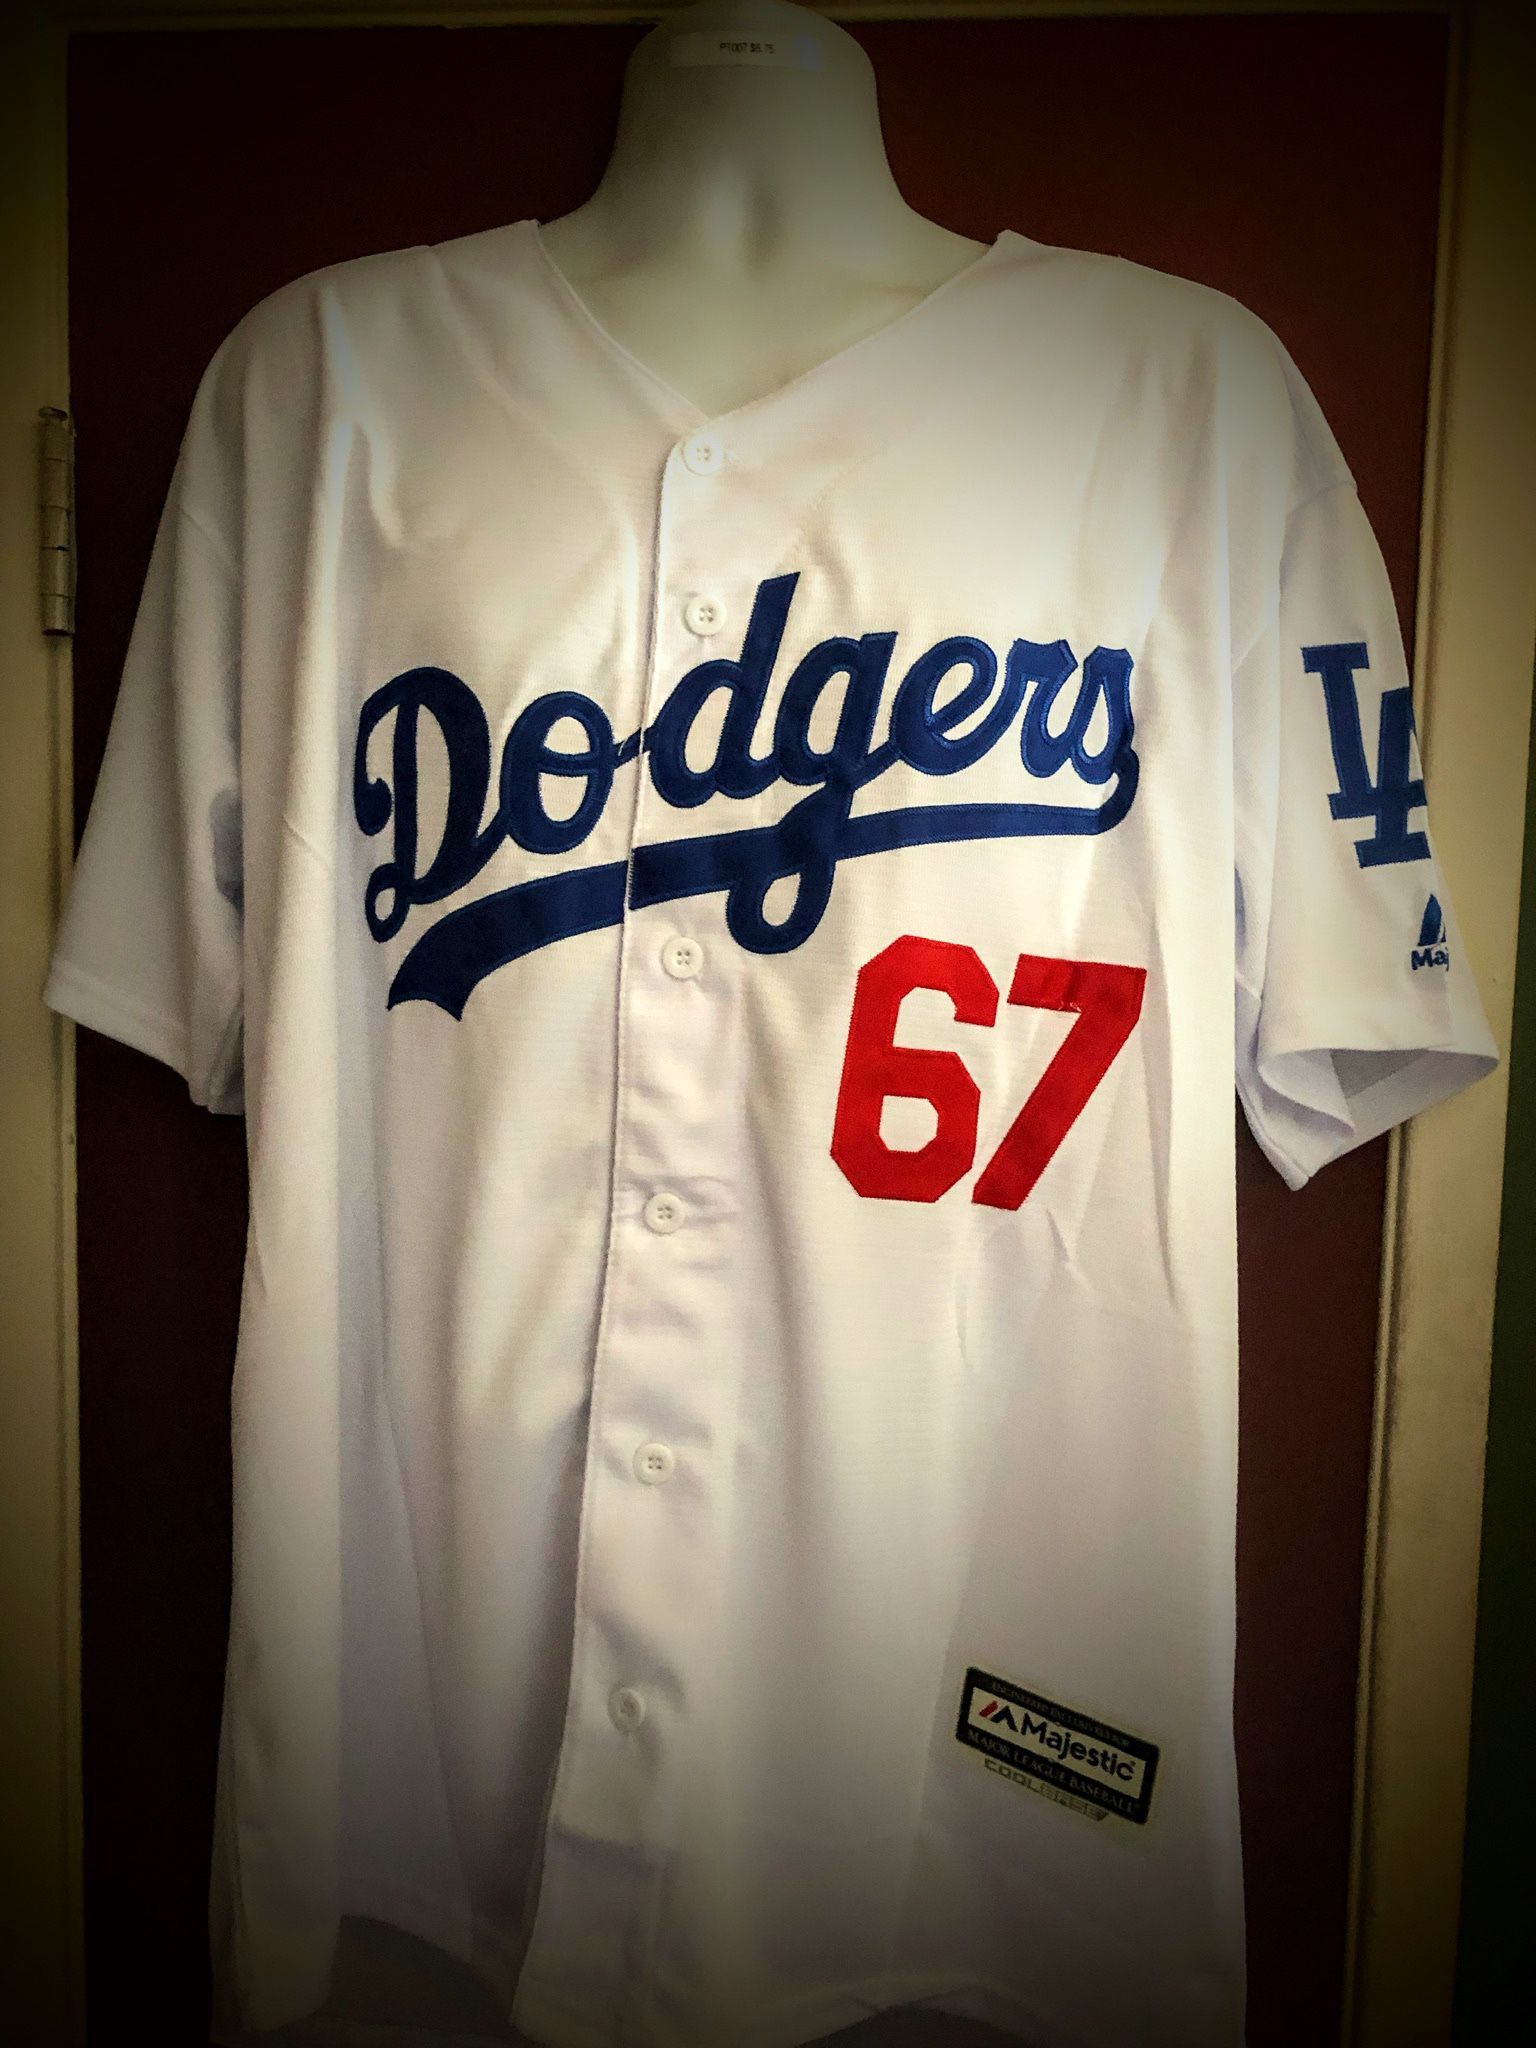 Los Angeles Dodgers #67 Vin Scully Commemorative MLB Baseball Jersey -S.L  for Sale in Long Beach, CA - OfferUp